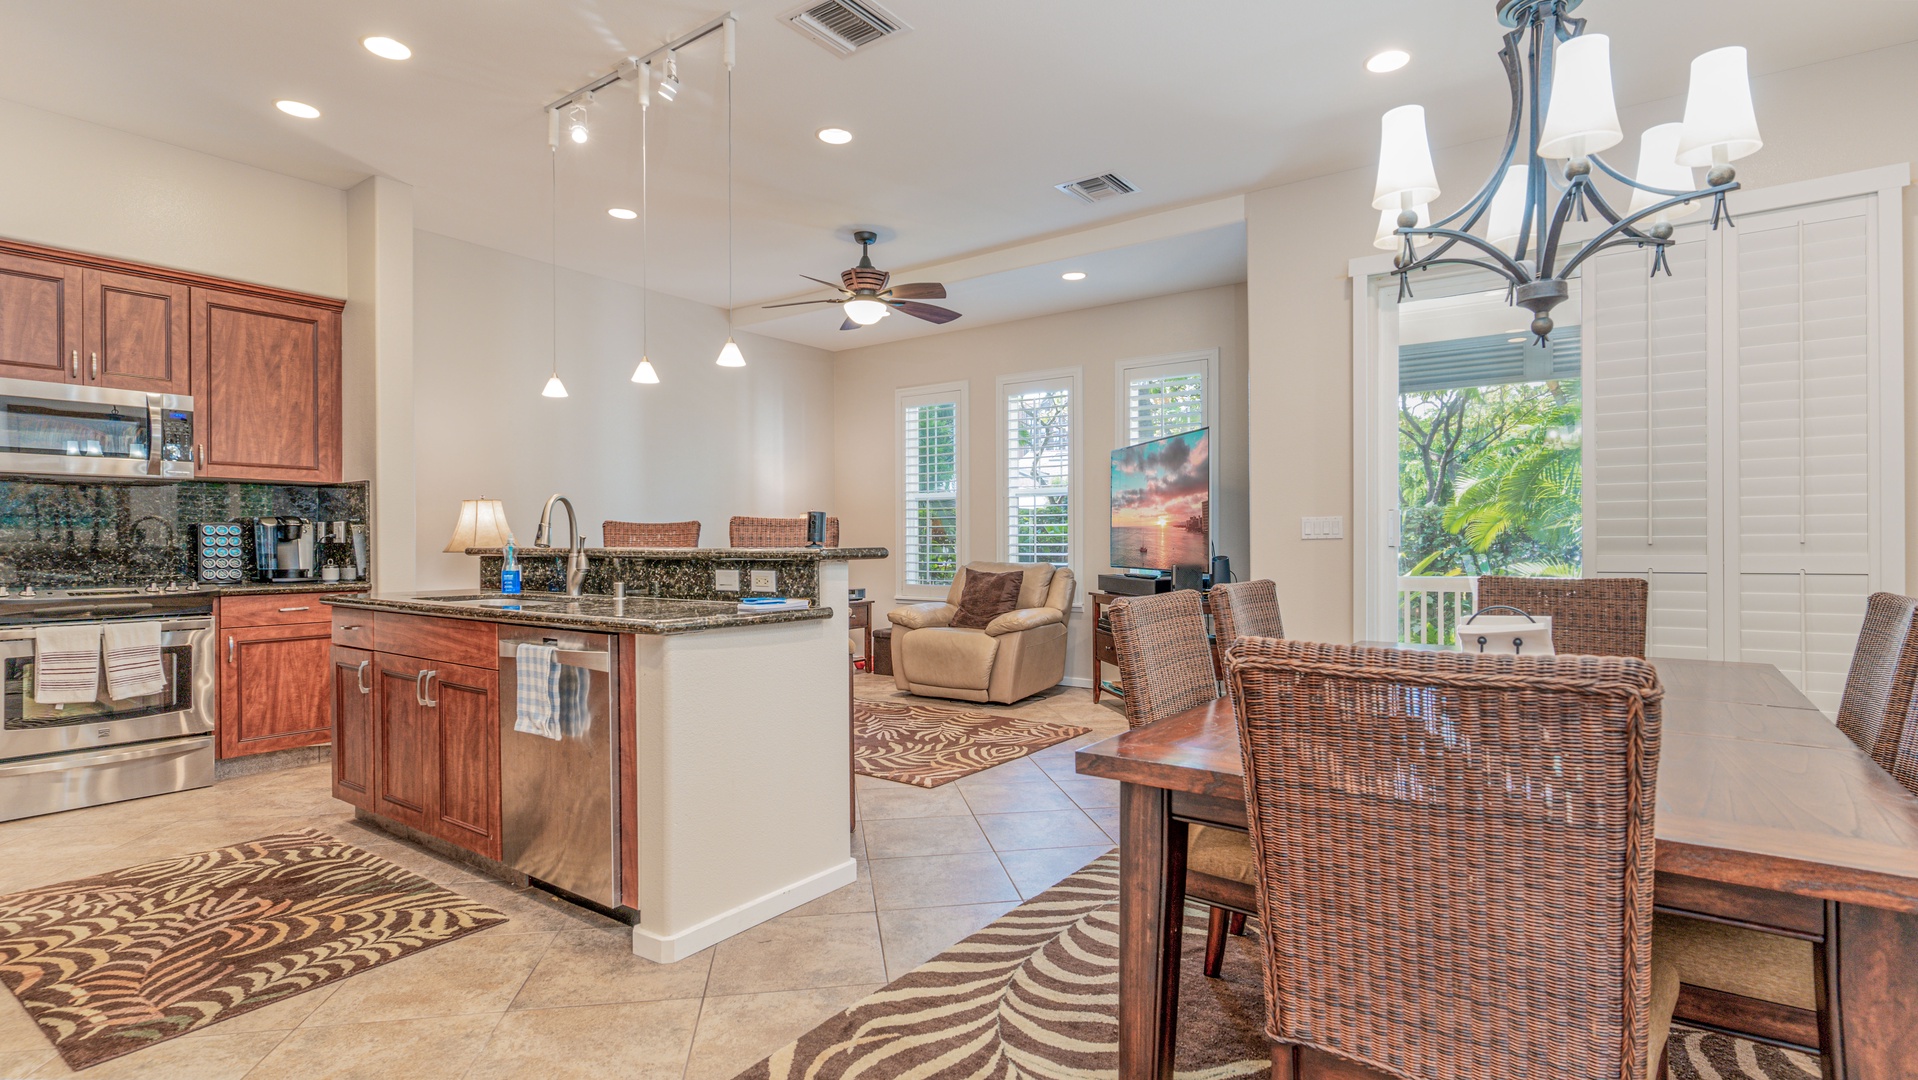 Kapolei Vacation Rentals, Coconut Plantation 1234-2 - The open floor plan is bright and airy.